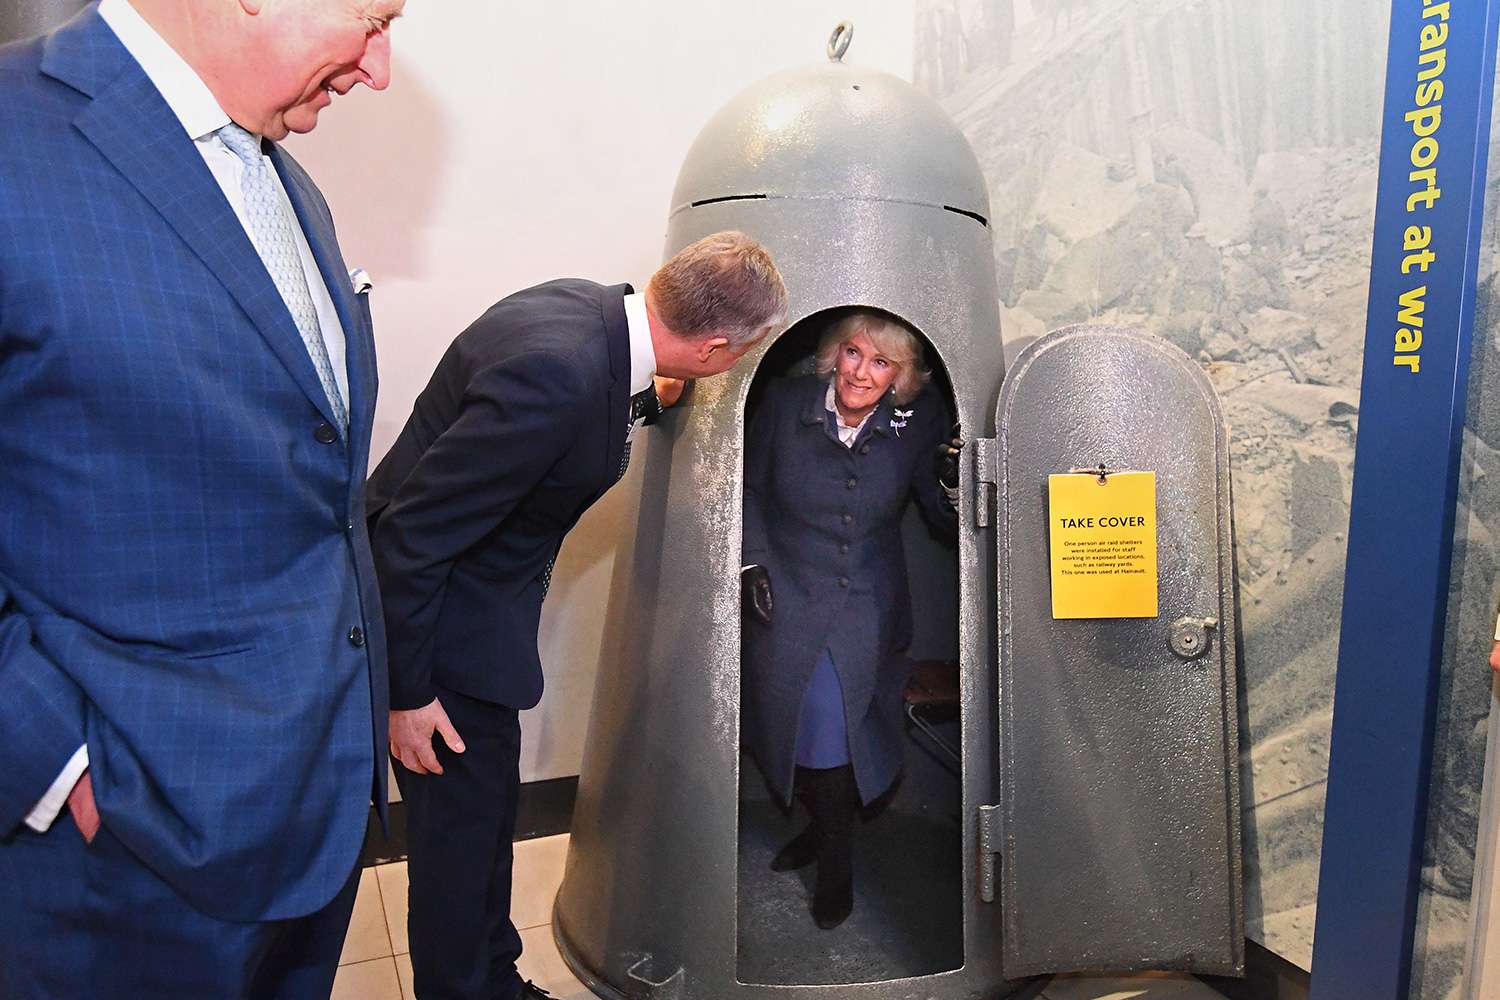 Prince Charles, Prince of Wales (L) reacts as Britain's Camilla, Duchess of Cornwall (C) tries out a one person air raid shelter during their visit to the London Transport Museum in London on March 4, 2020